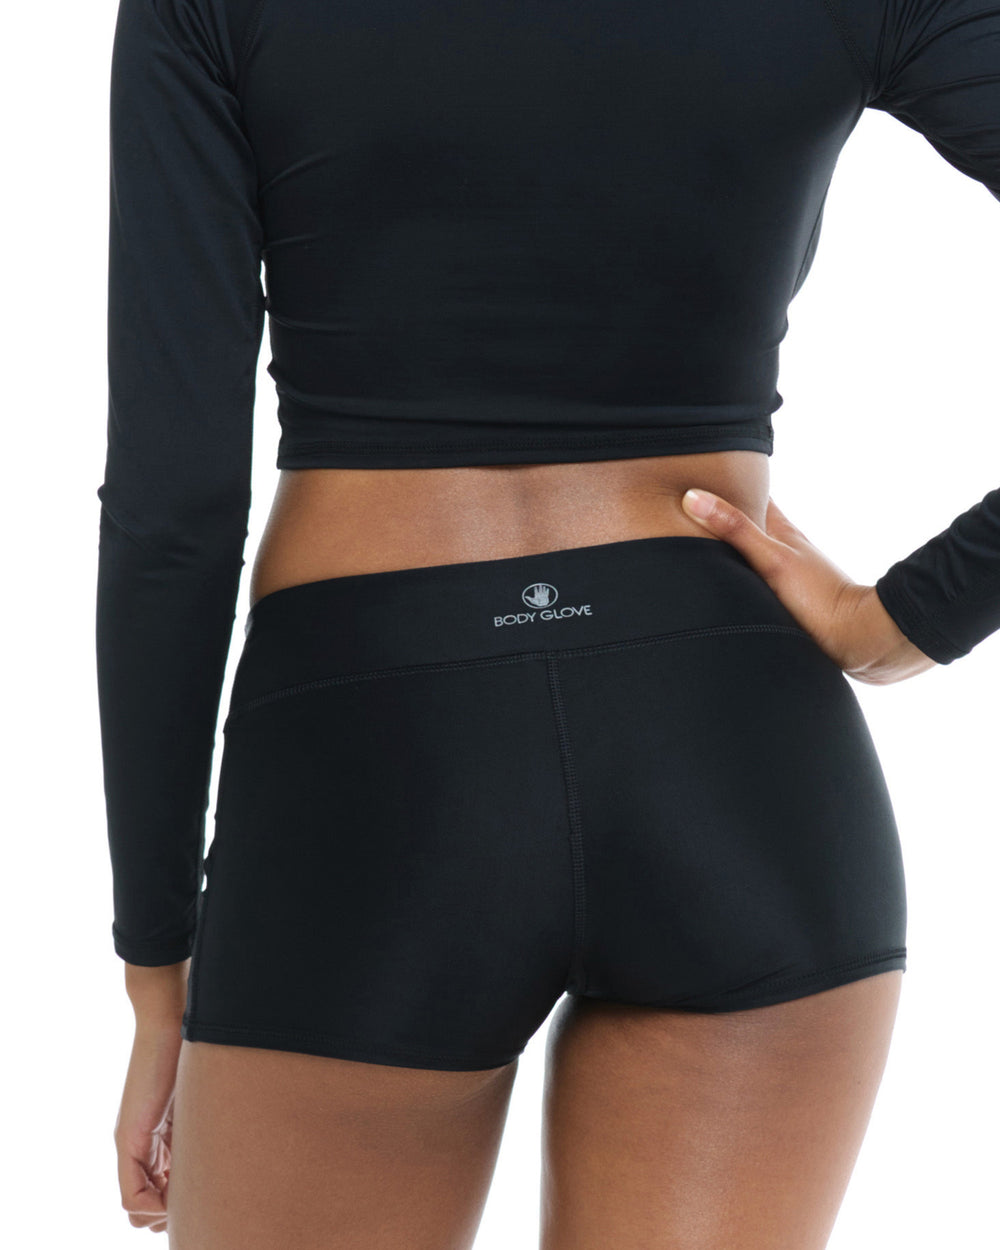 Smoothies Rider Cross-Over Shorts - Black